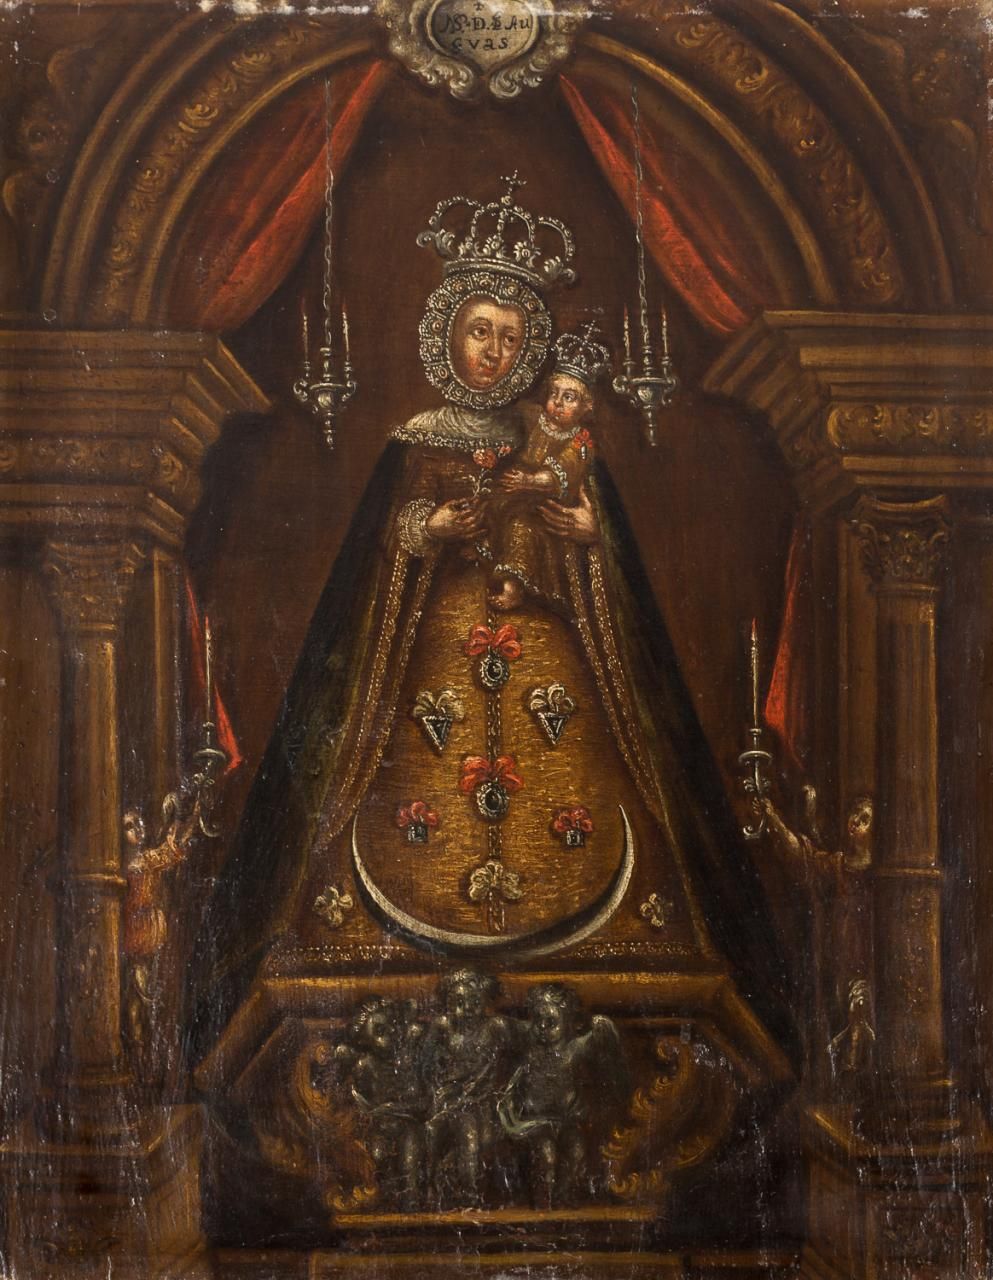 ESCUELA ESPAÑOLA S. XVIII Our Lady of the Waters
Oil on panel
50 x 38,5 cm